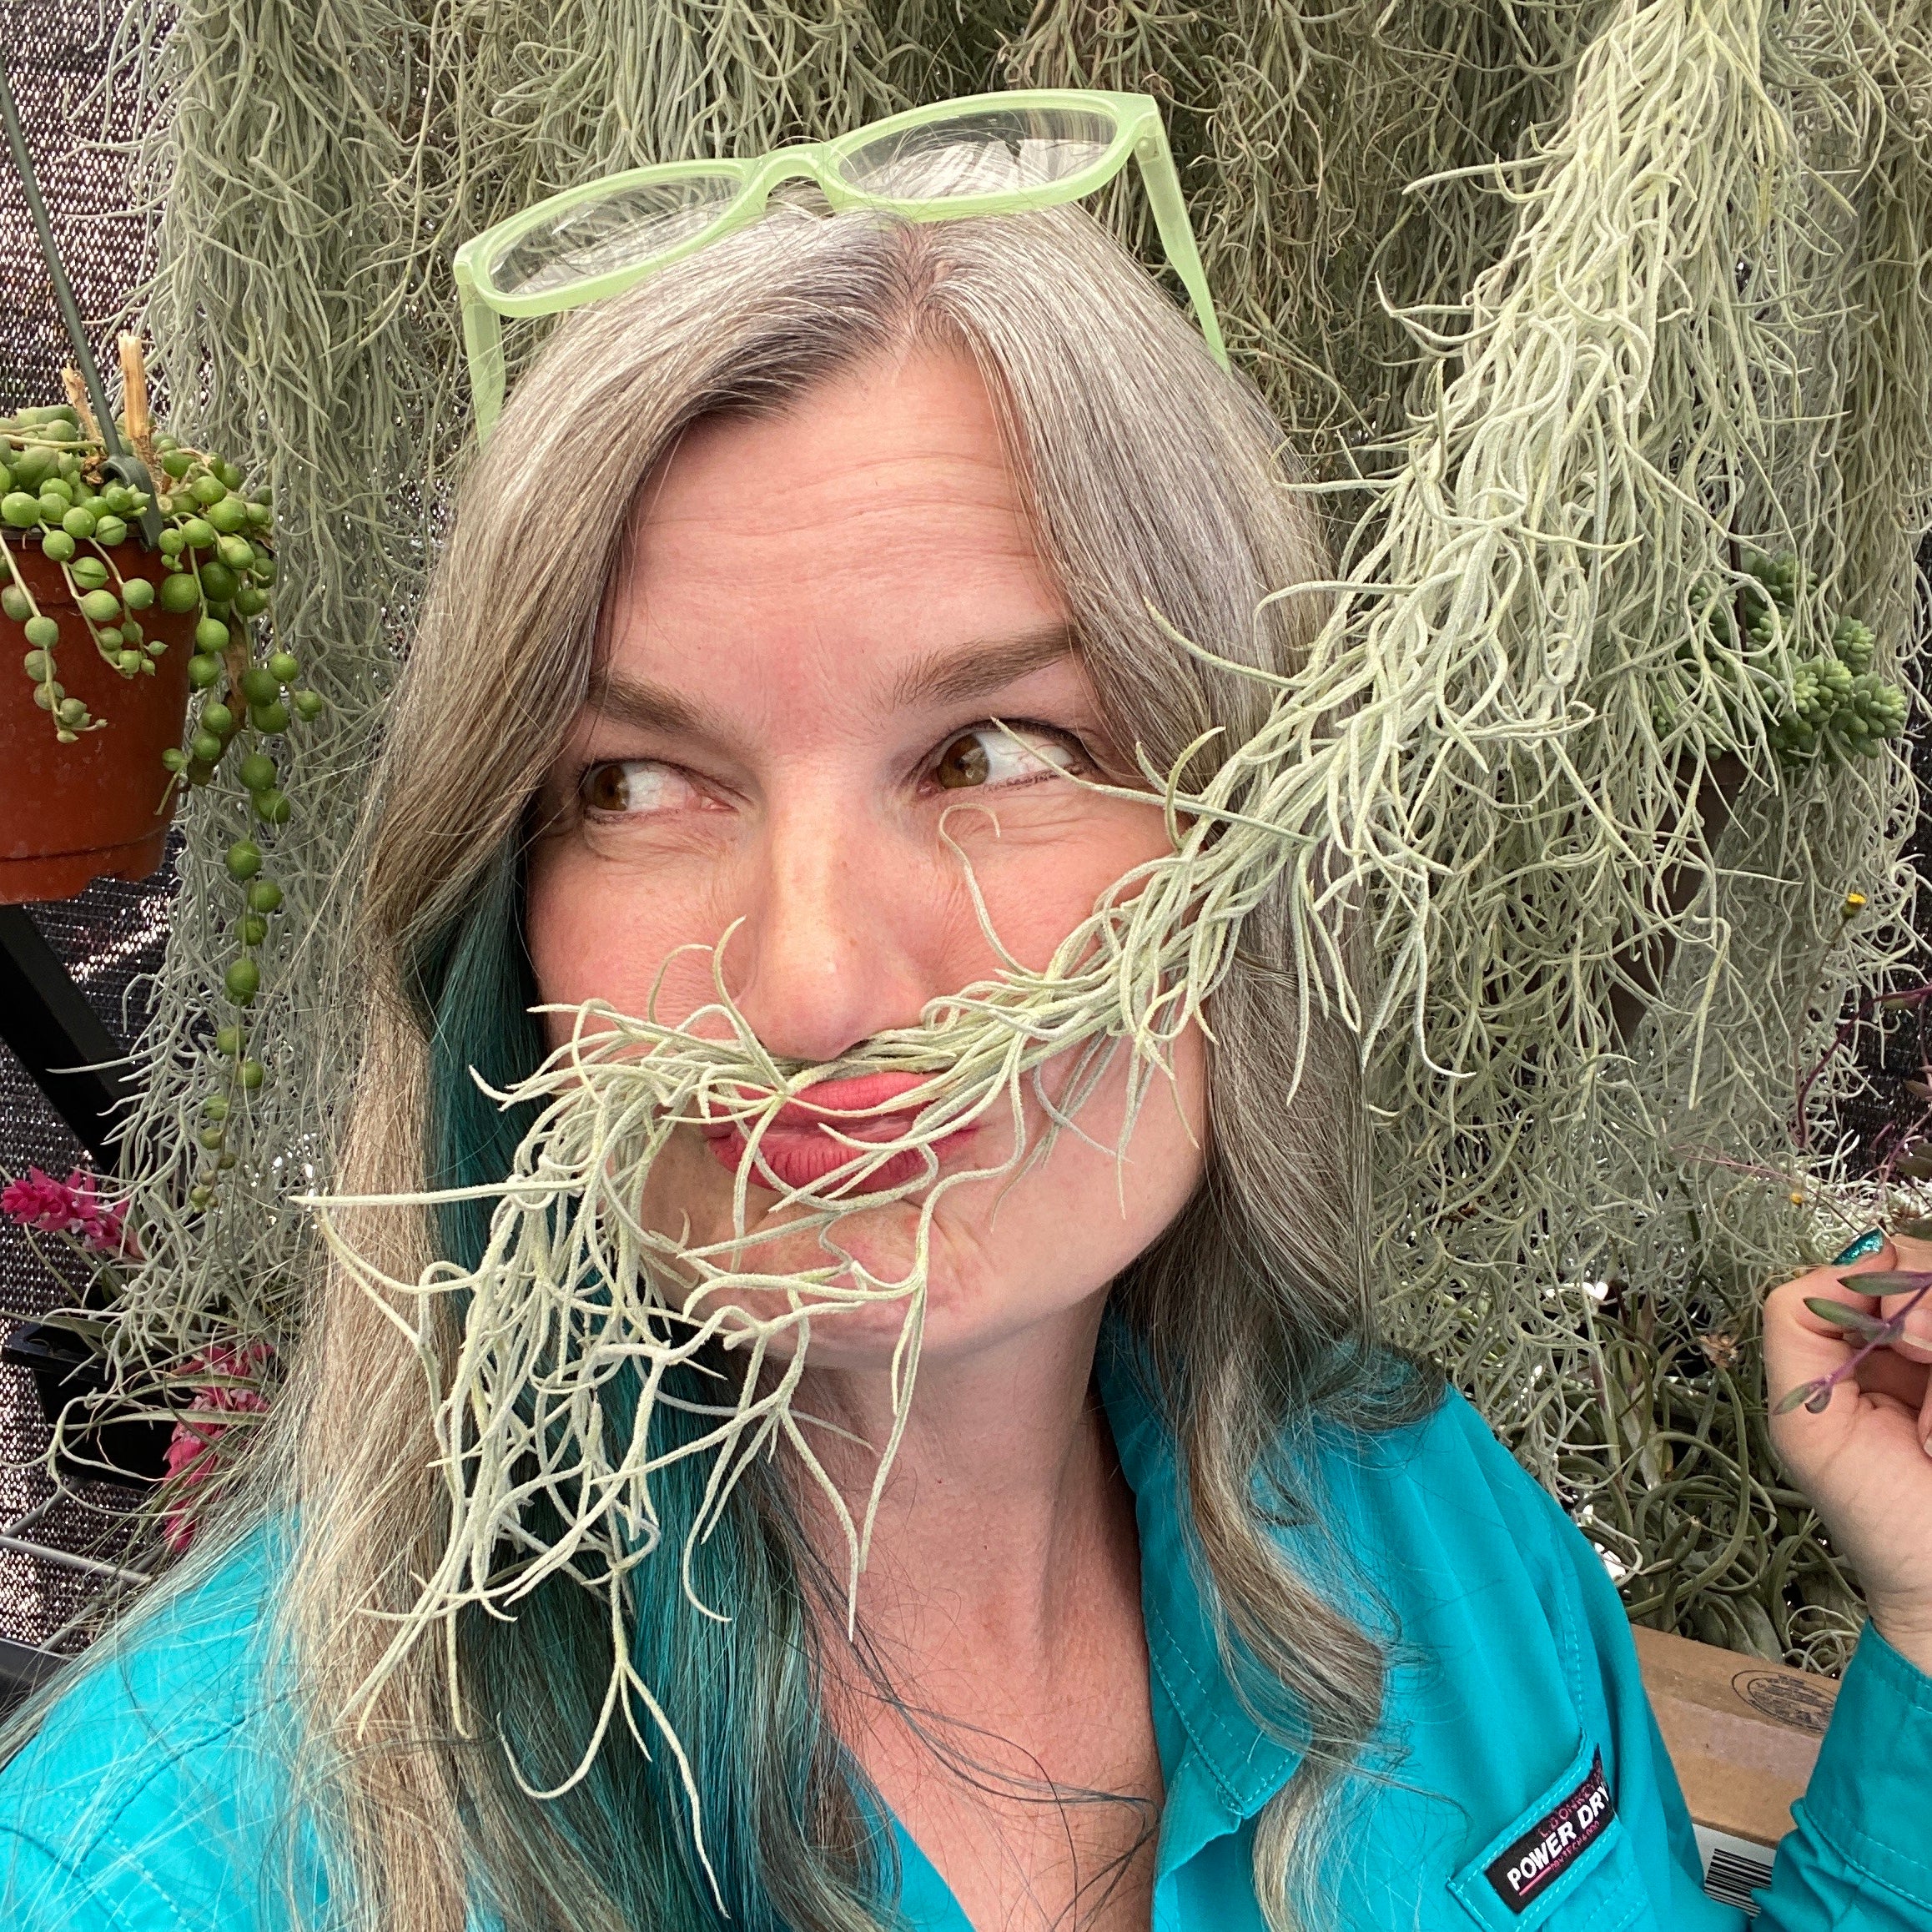 Portrait of Partly Sunny Projects' founder Sonja using a plant as a moustache